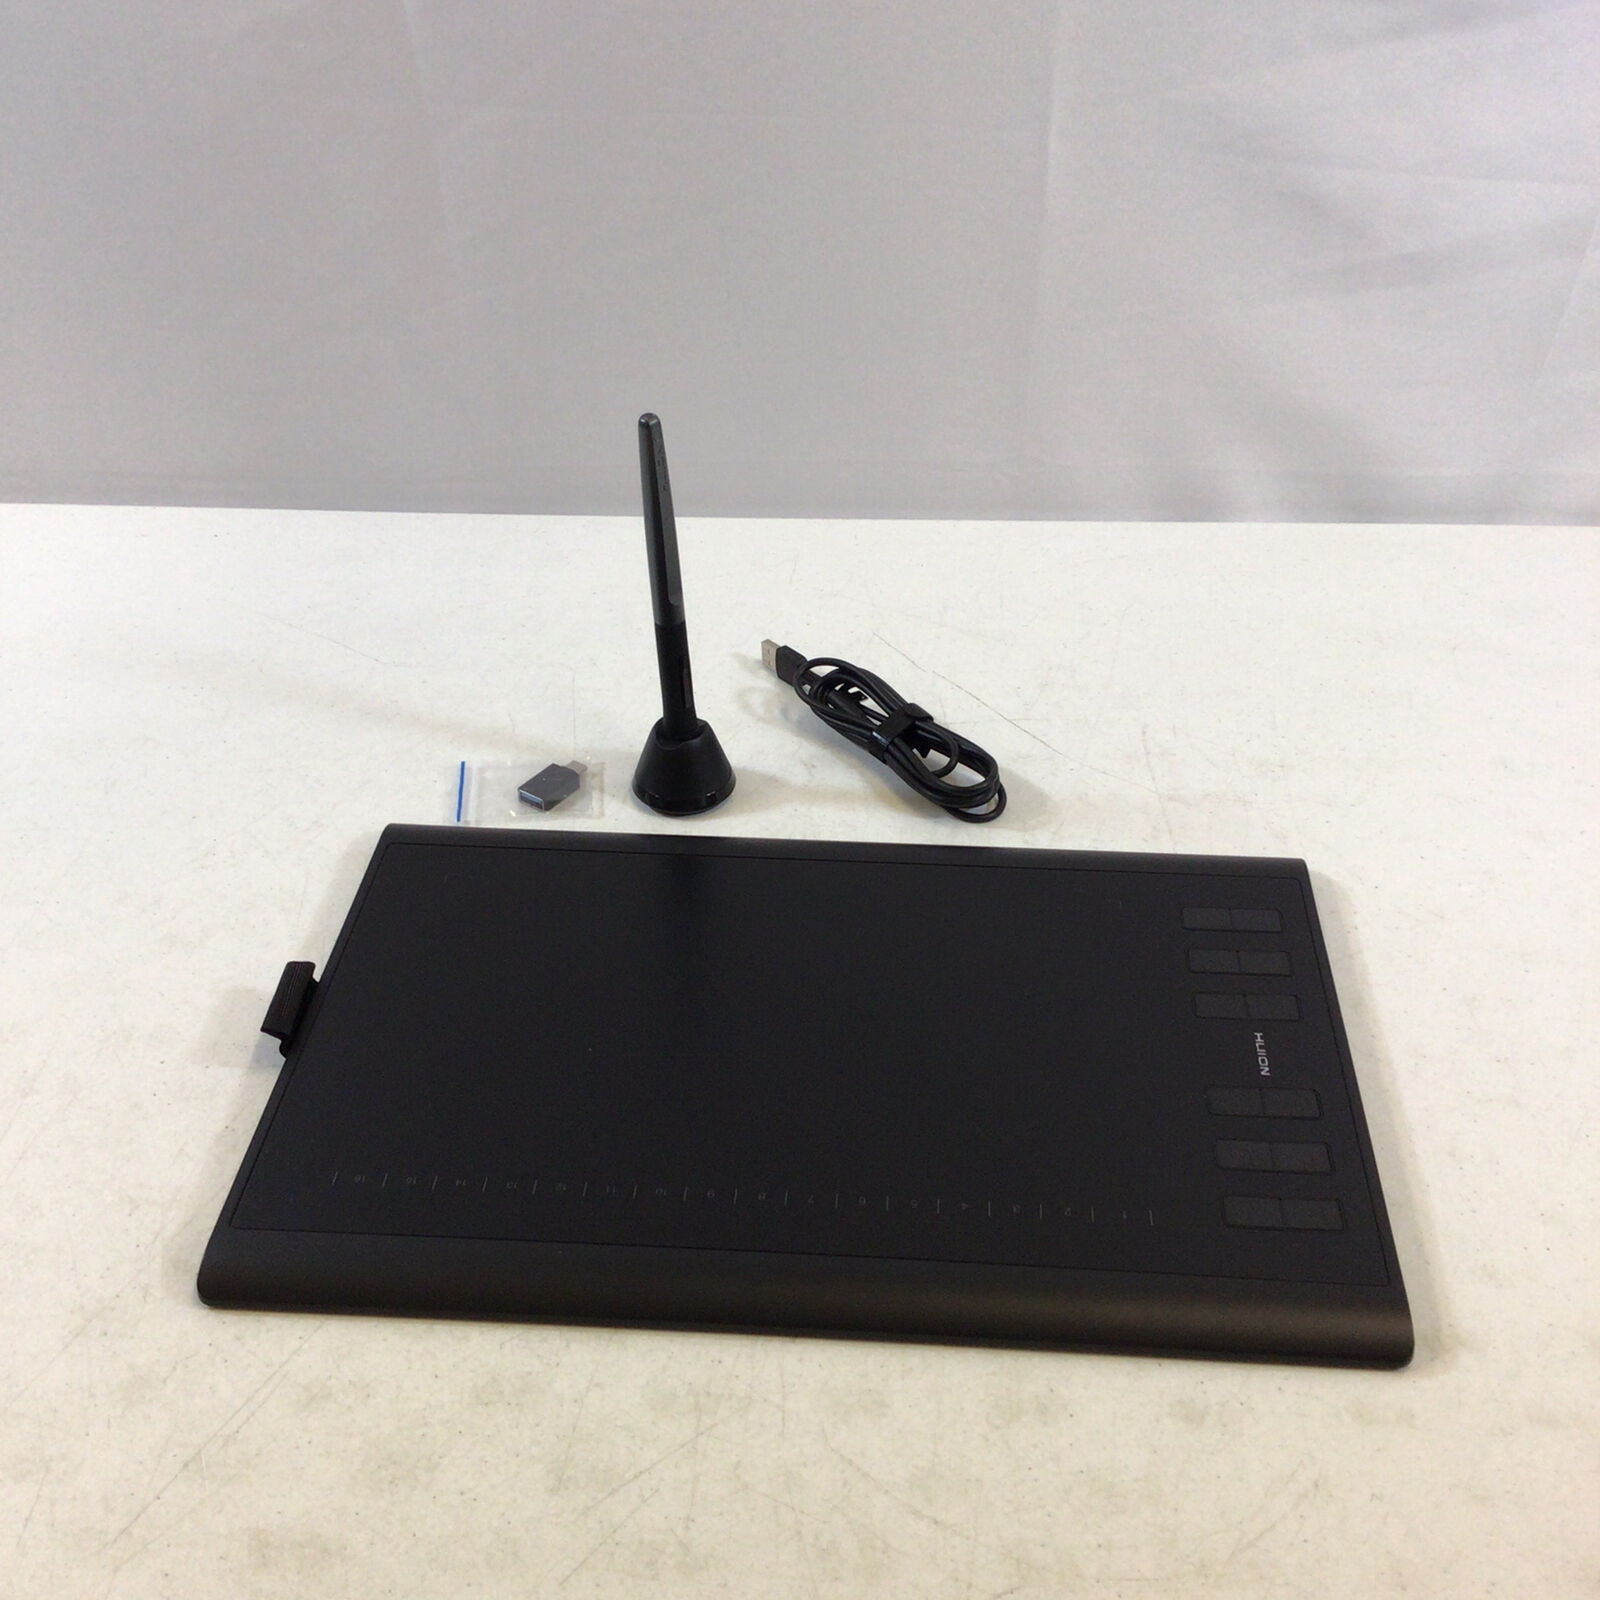 Huion Black Graphic Drawing Tablet With 8192 Pressure Sensitivity Battery Stylus